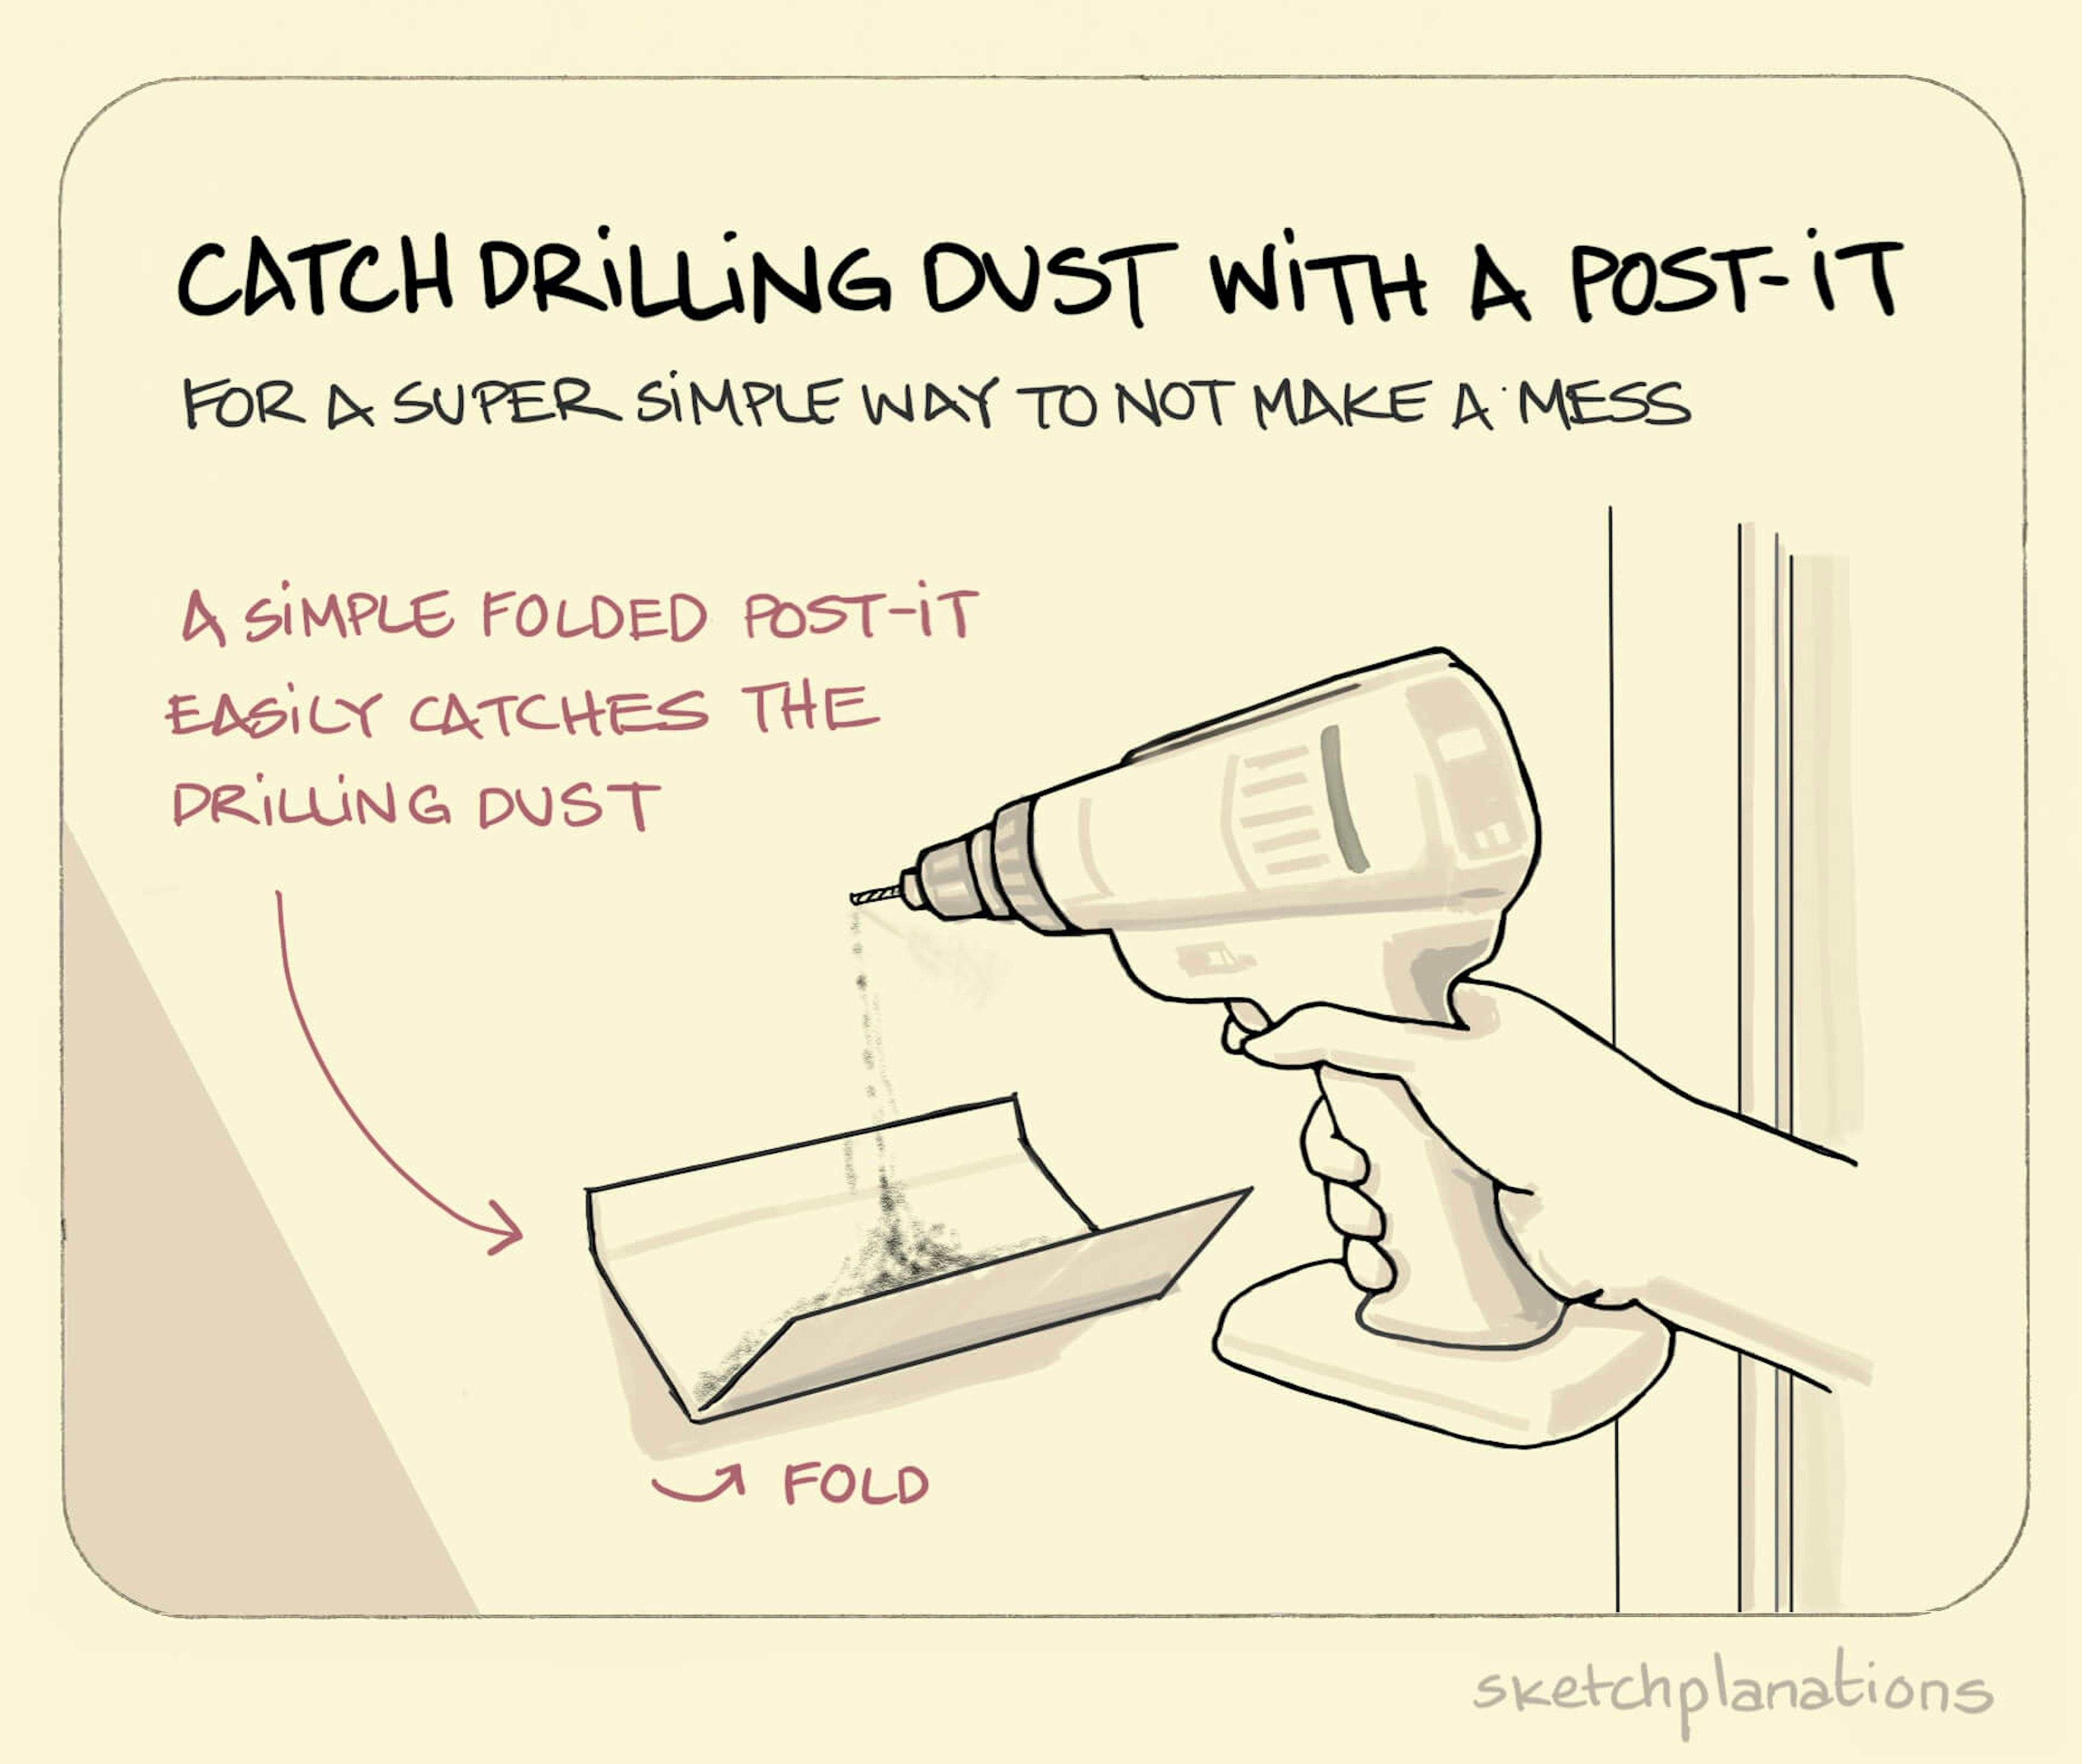 Catch drilling dust with a post-it illustration: with one fold along its length, a post-it note is stuck to the wall creating a little shelf to catch all the dust from a drill boring a hole in the wall just above.